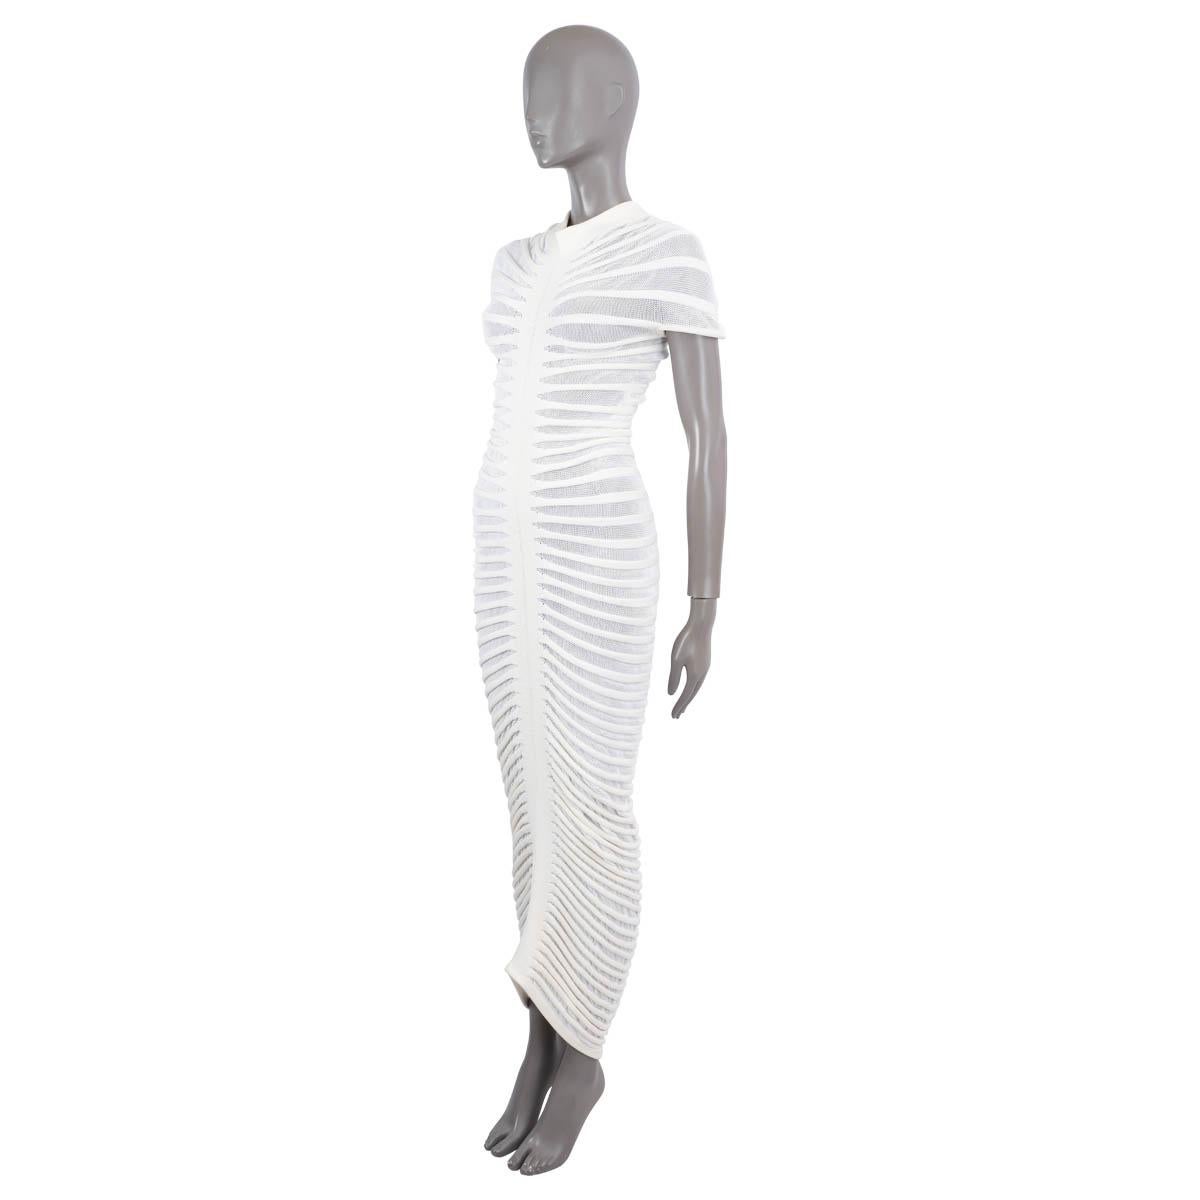 100% authentic Alaïa open-knit maxi dress in off-white cotton (65%), polyamide (35%). Fabric 2: is made of viscose (75%) polyamide (24%) and polyurethane (1%). Opens with a zipper on the back, top and bottom. Unlined. Has been worn once and is in